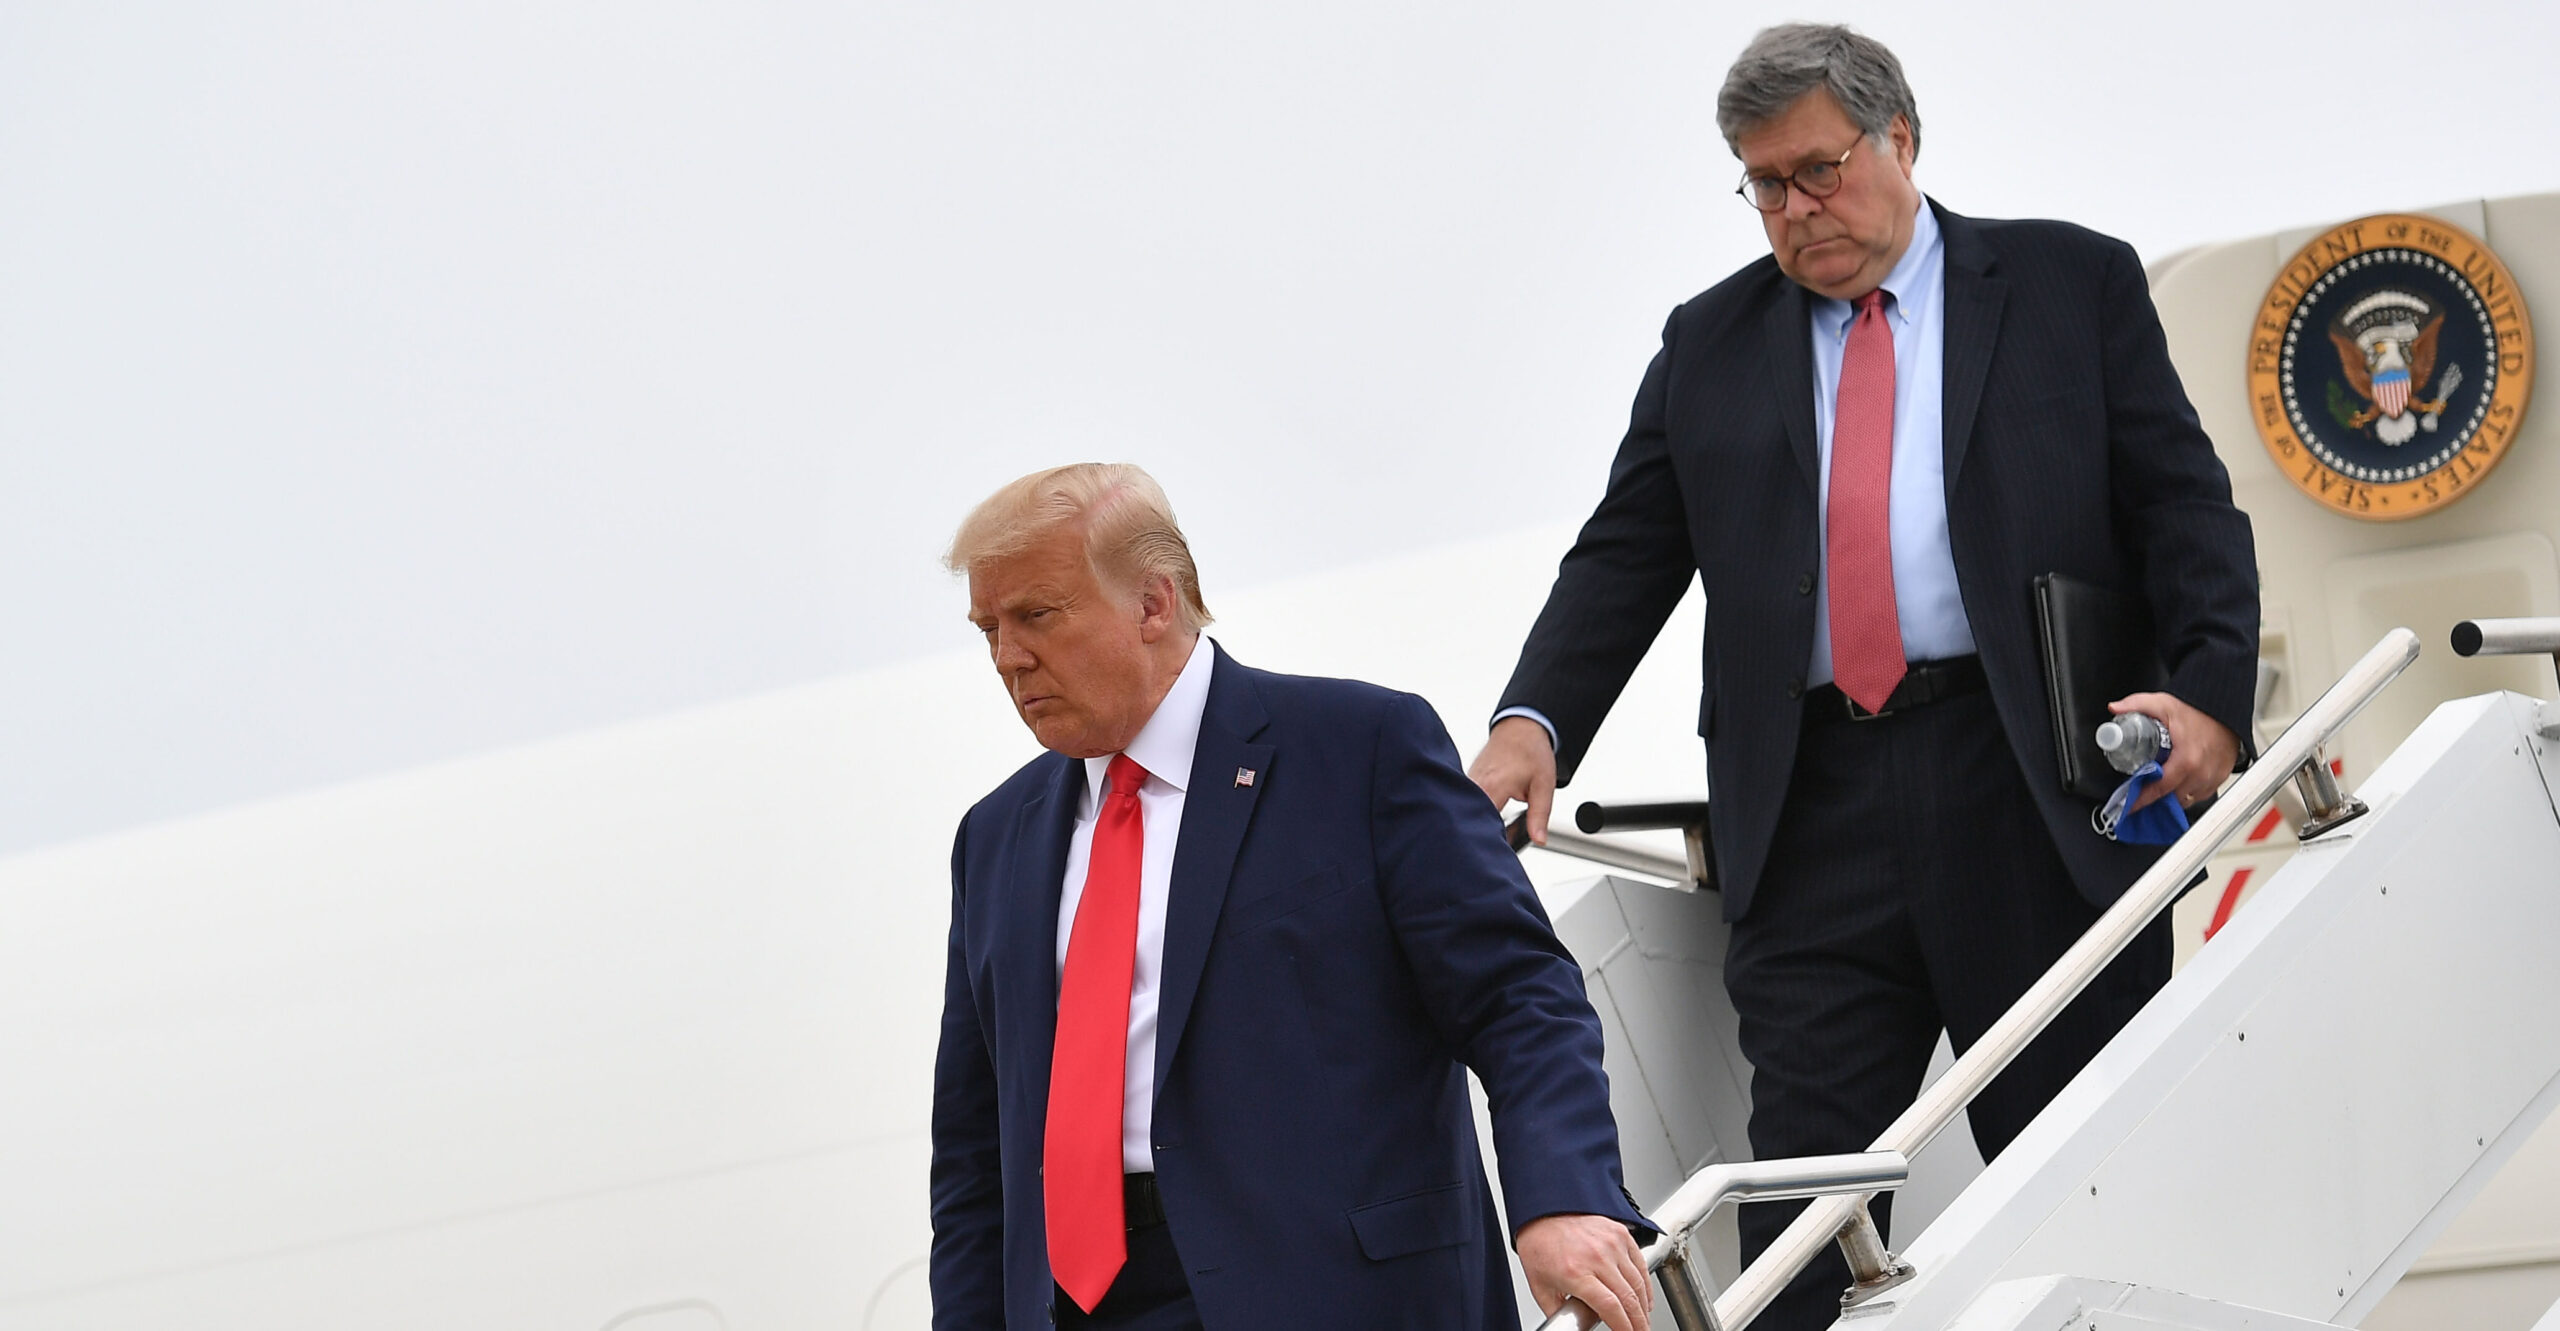 Trump Calls Barr, McConnell RINOs for Dismissing Claims of 'Rigged' Vote